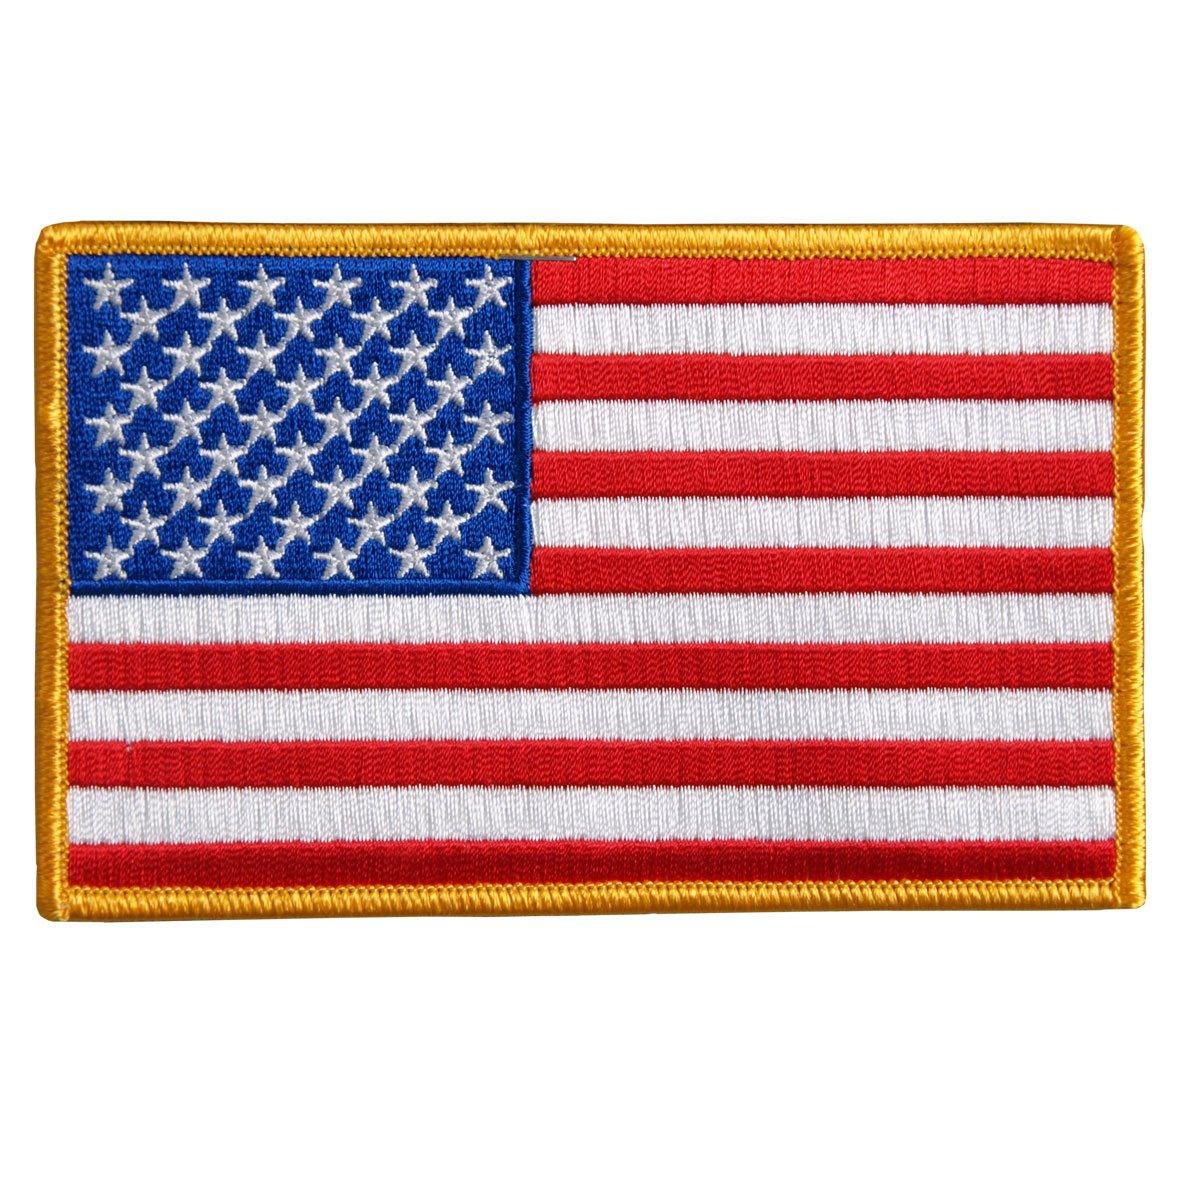 Hot Leathers 10" X 6" American Flag Patch - American Legend Rider